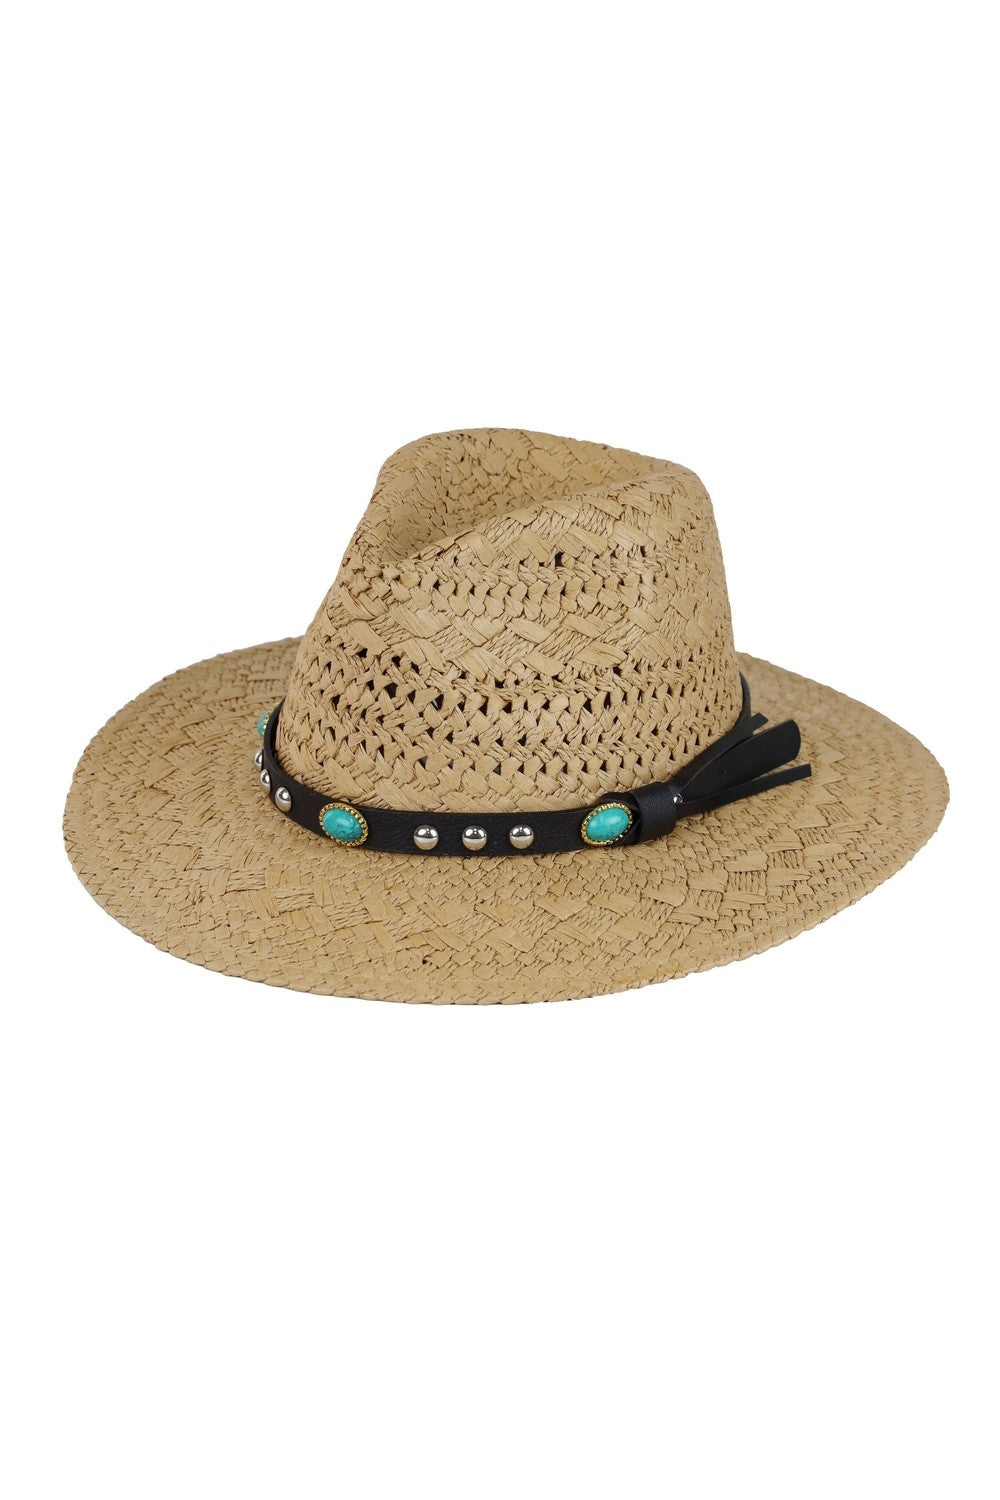 Straw Handmade Sun Hat with Beaded Band Taupe - Pack of 6